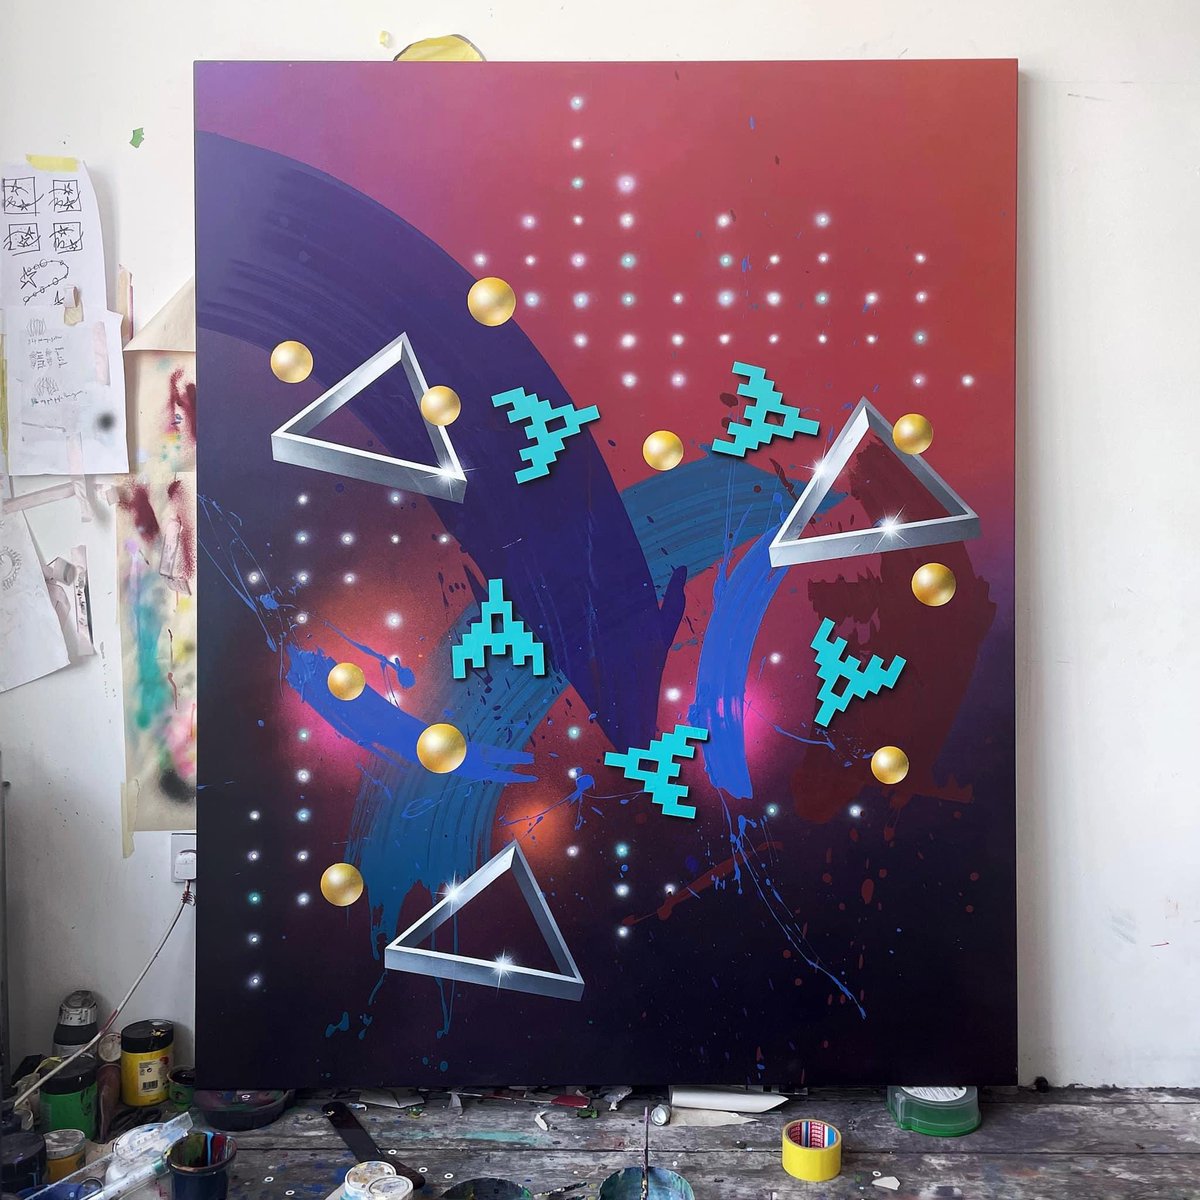 Nothing But Trouble, Who The Hell Cares (2022), acrylic on canvas, 140cm x 175cm
-
-
#contemporarypainting #artiststudio #abstractpainting #abstractart #hardedgepainting #abstractexpressionism #geometricart #artcollector  #brandmarketing #cooladvertising #freshart #coolartwork